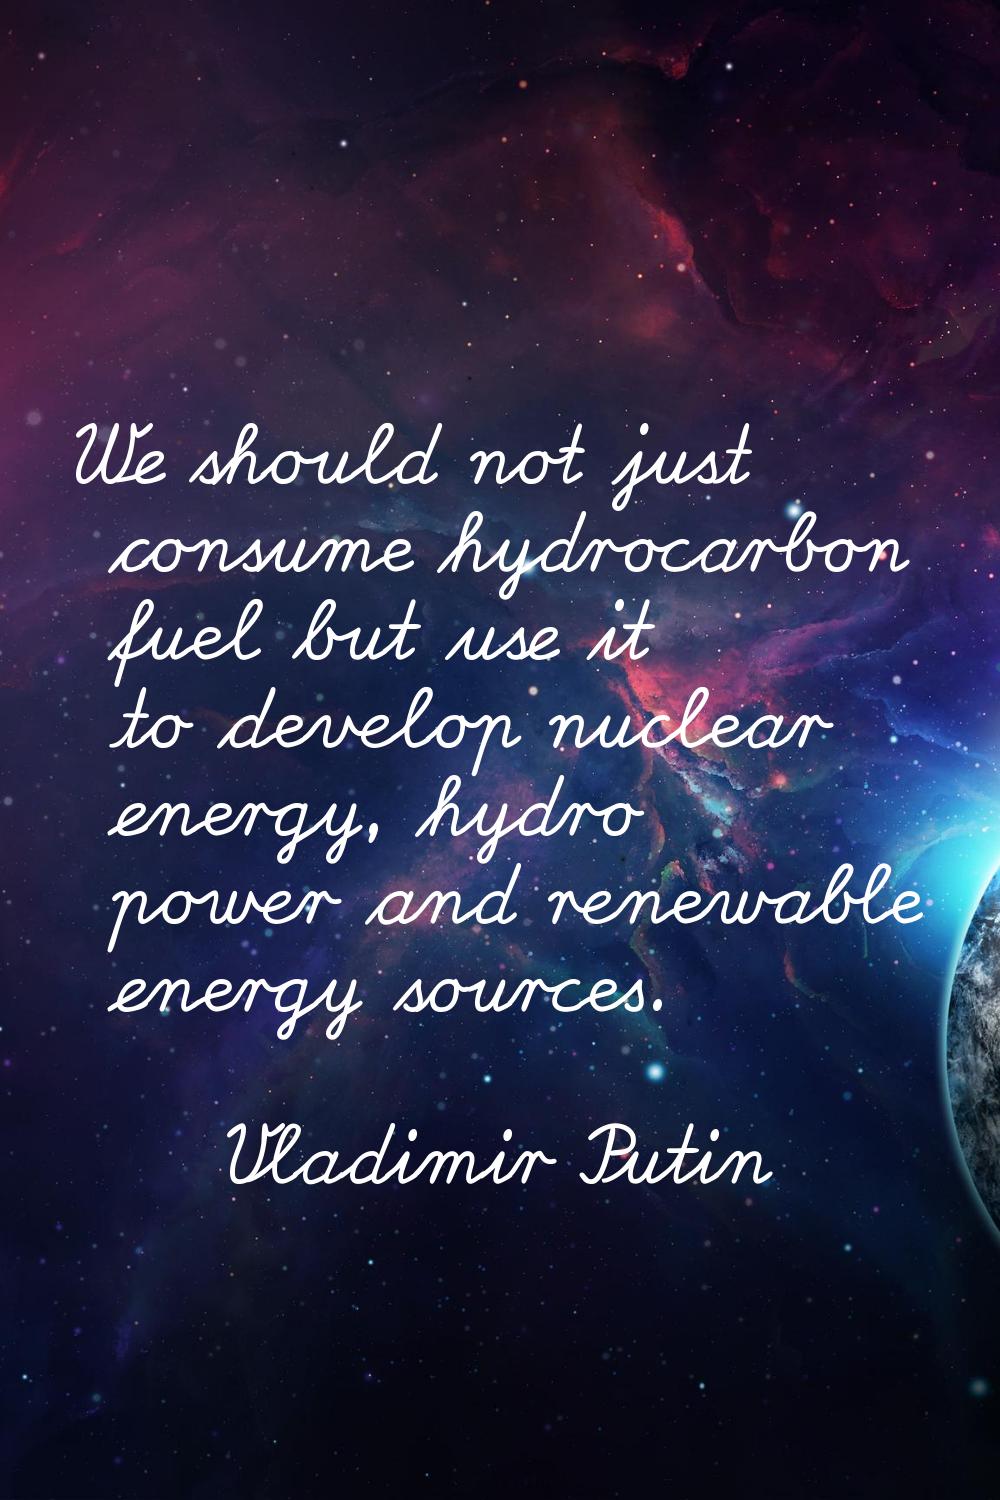 We should not just consume hydrocarbon fuel but use it to develop nuclear energy, hydro power and r